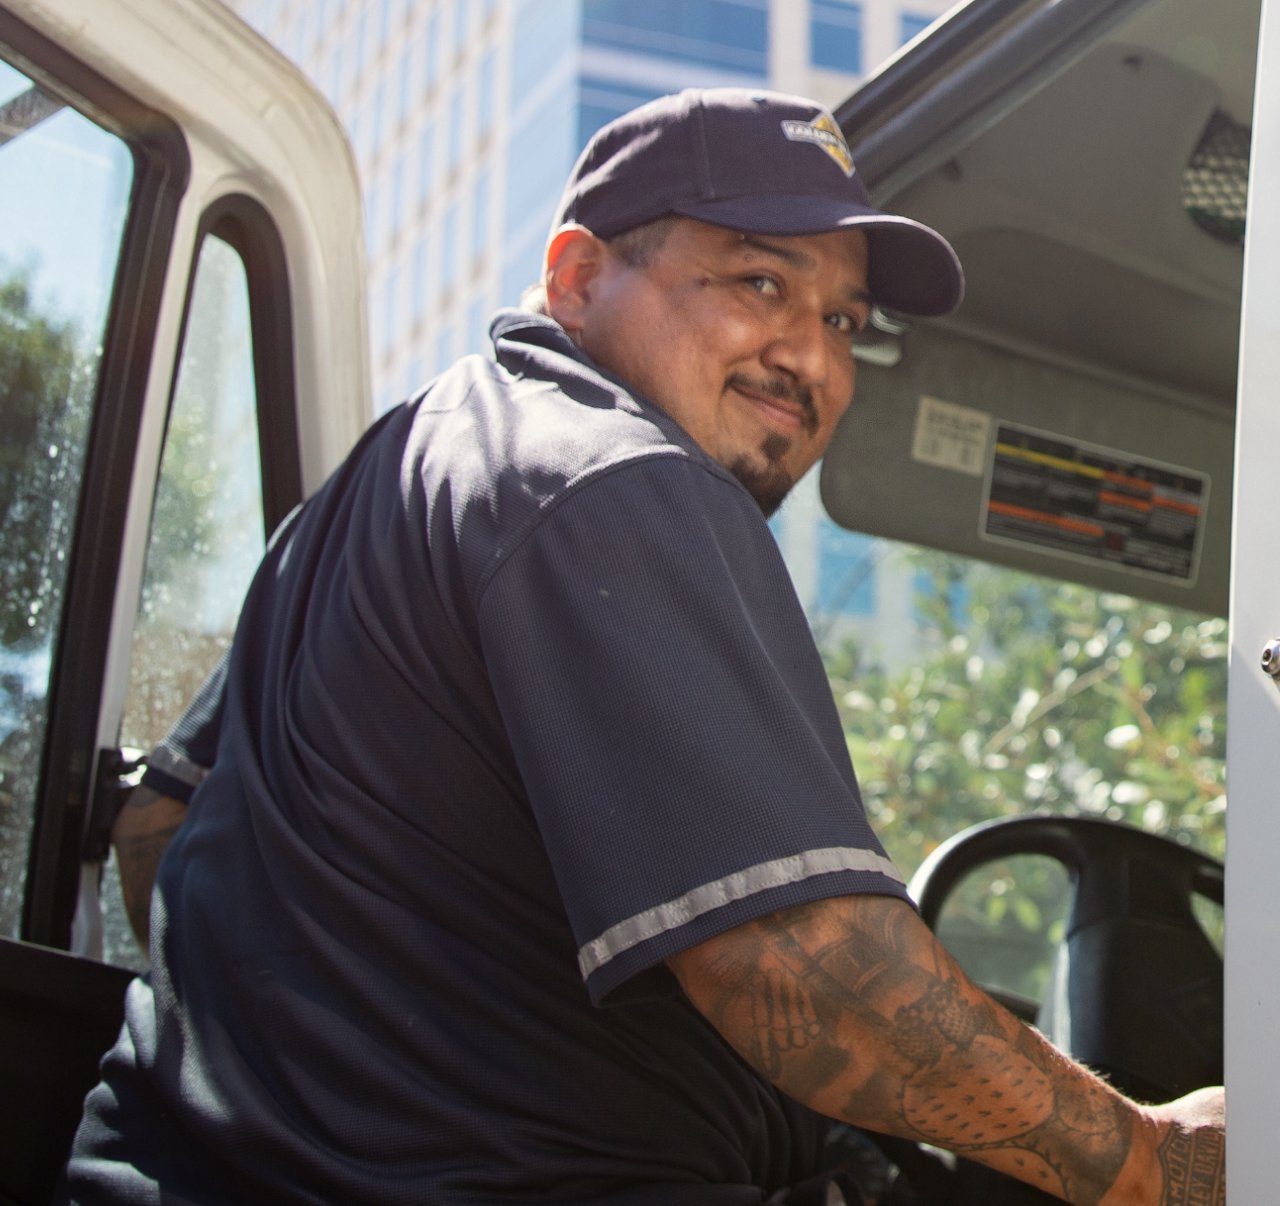 A man wearing a navy hat in a navy polo type shirt with grey reflective band at the bottom of the sleeves getting into a delivery truck cab